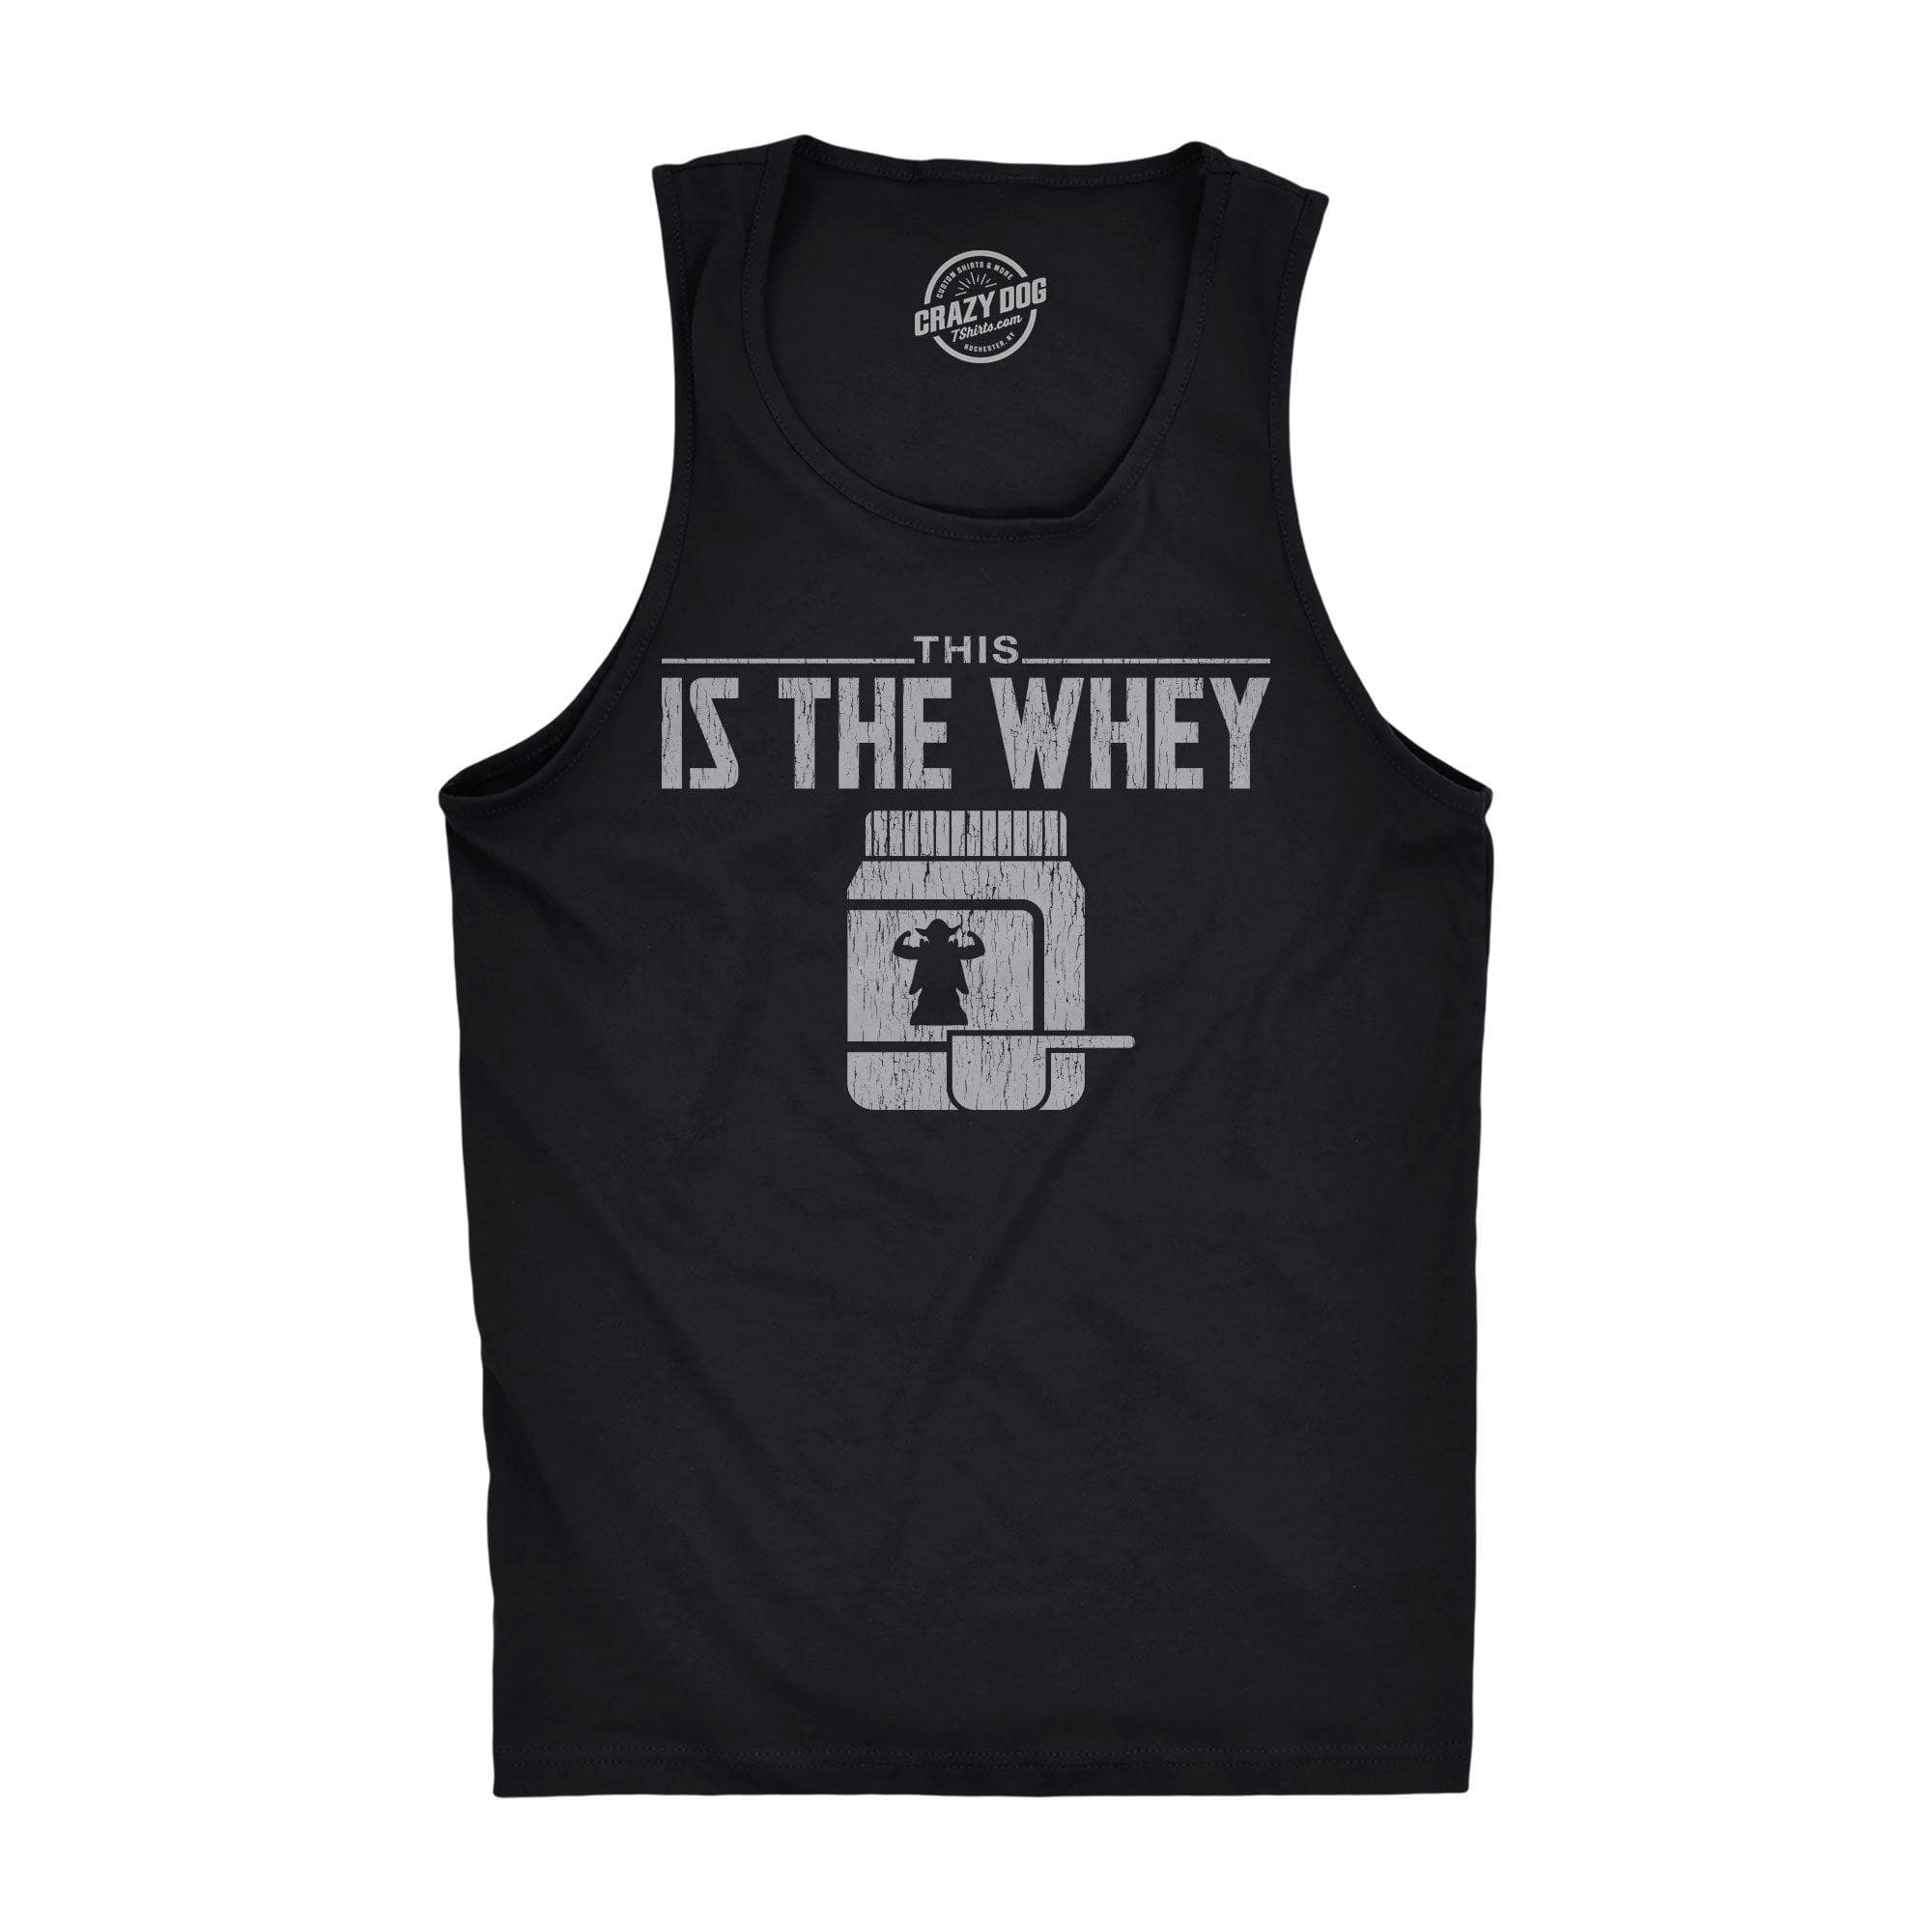 This Is The Whey Men's Tank Top - Crazy Dog T-Shirts